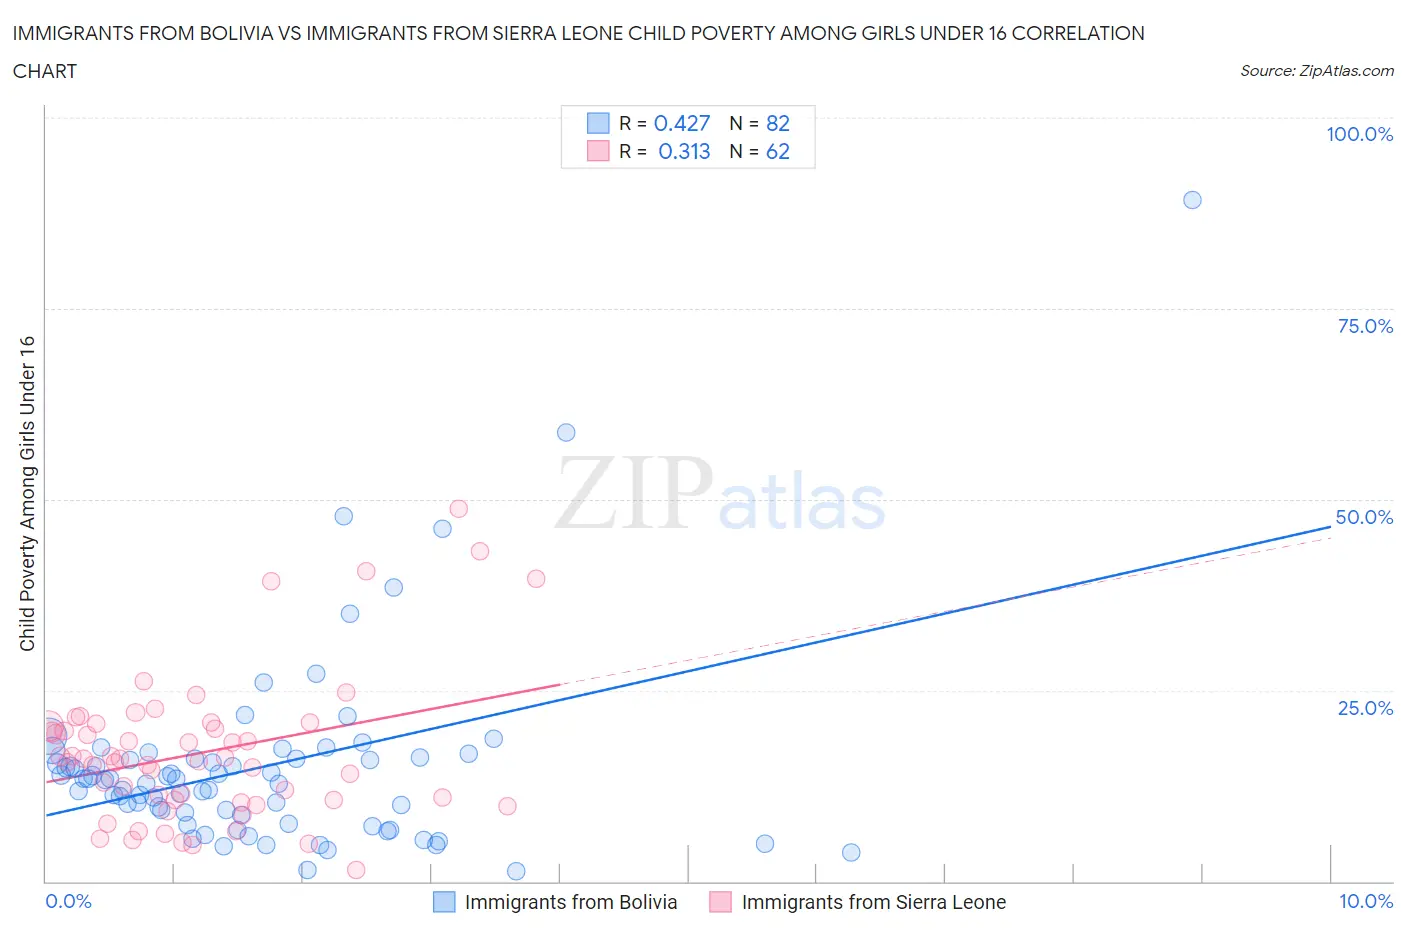 Immigrants from Bolivia vs Immigrants from Sierra Leone Child Poverty Among Girls Under 16